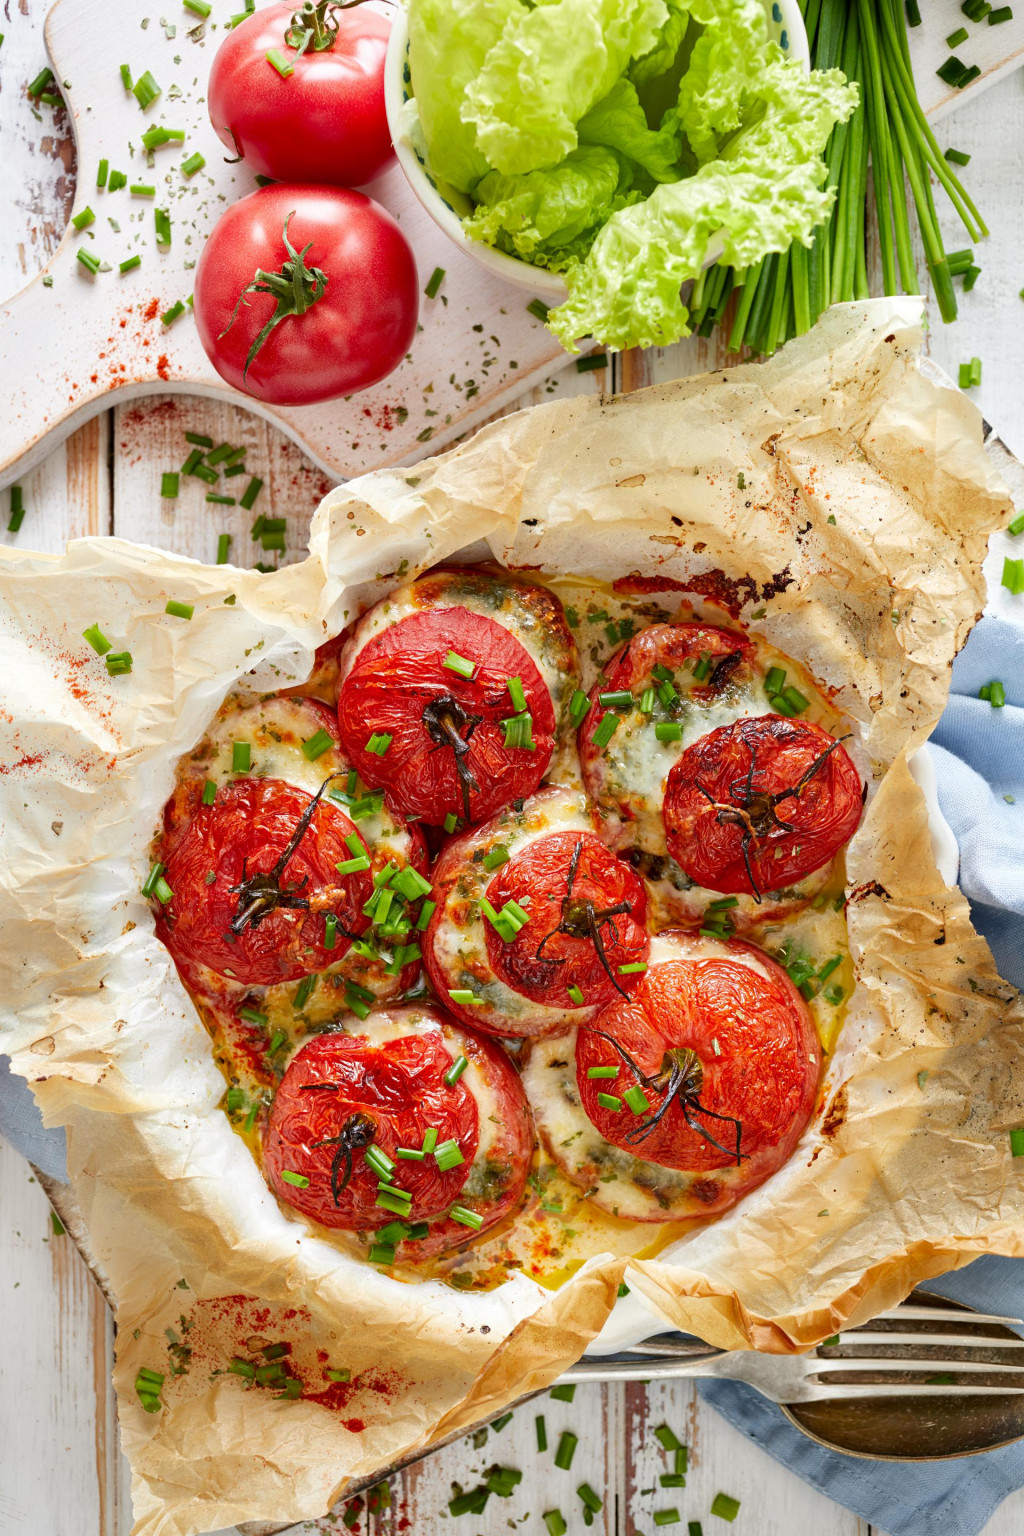 Oven baked tomatoes stuffed with spinach, mozzarella cheese and fresh chive, top view